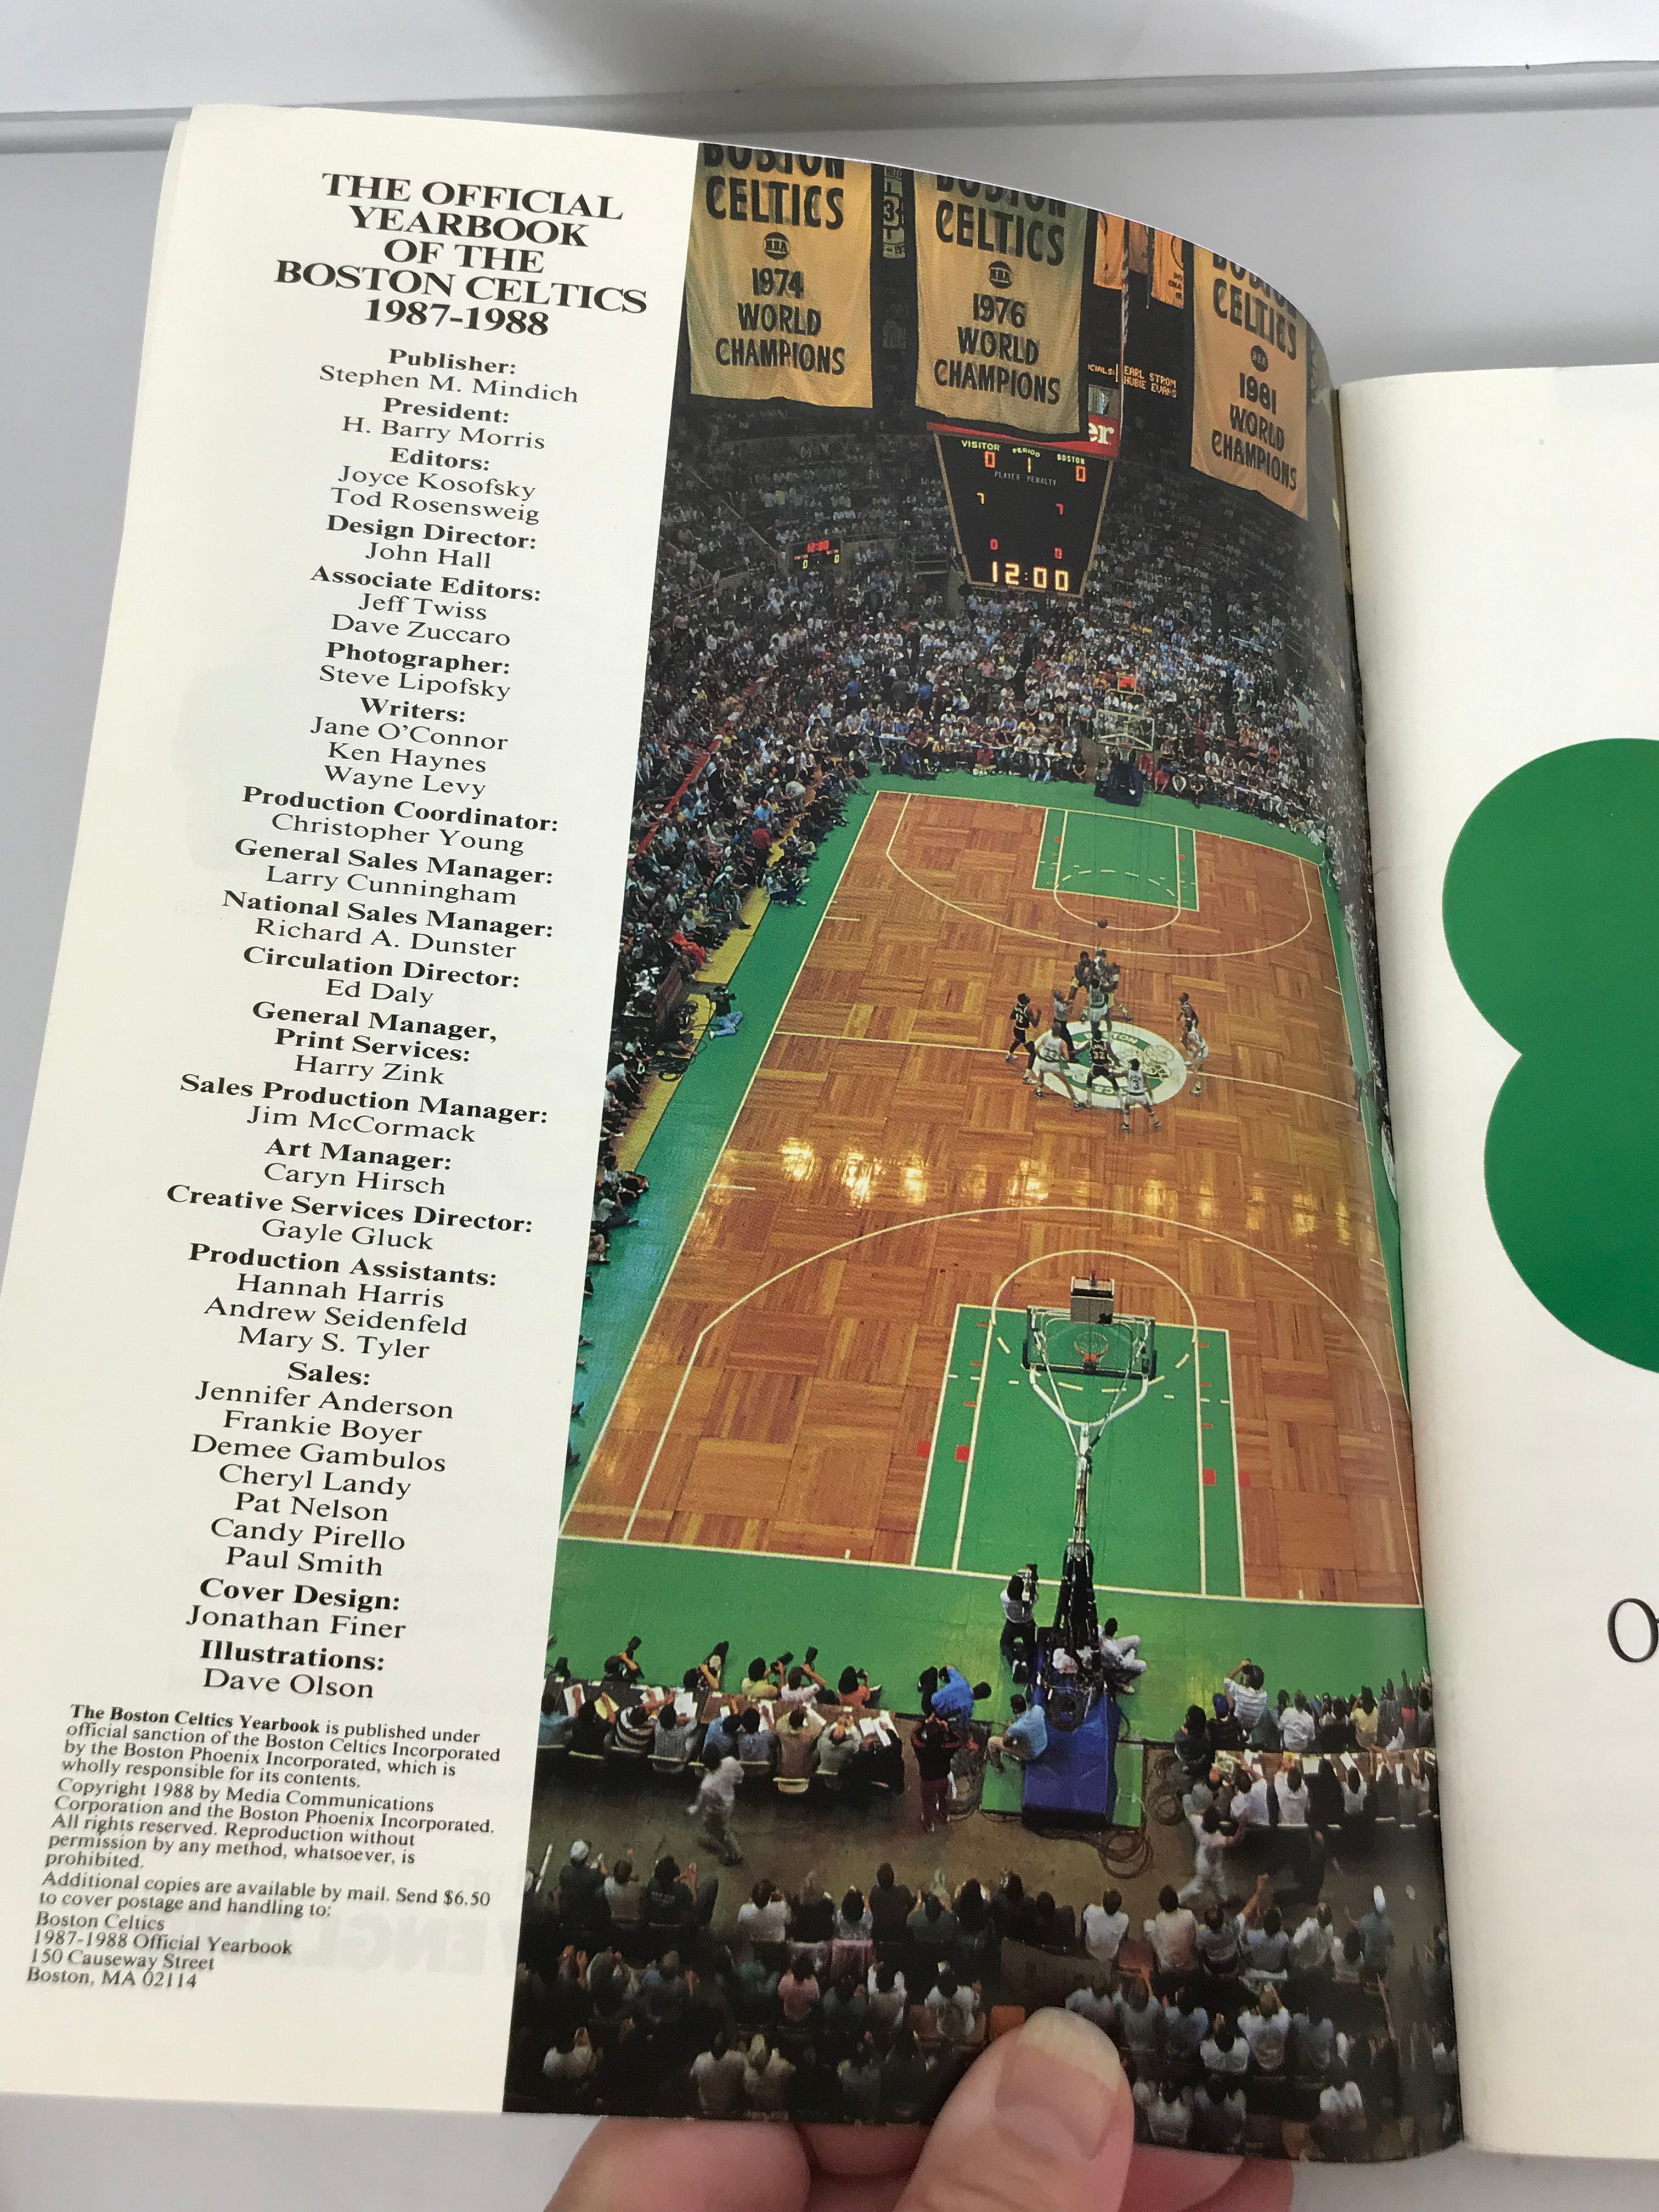 Boston Celtics 1987 Official Yearbook